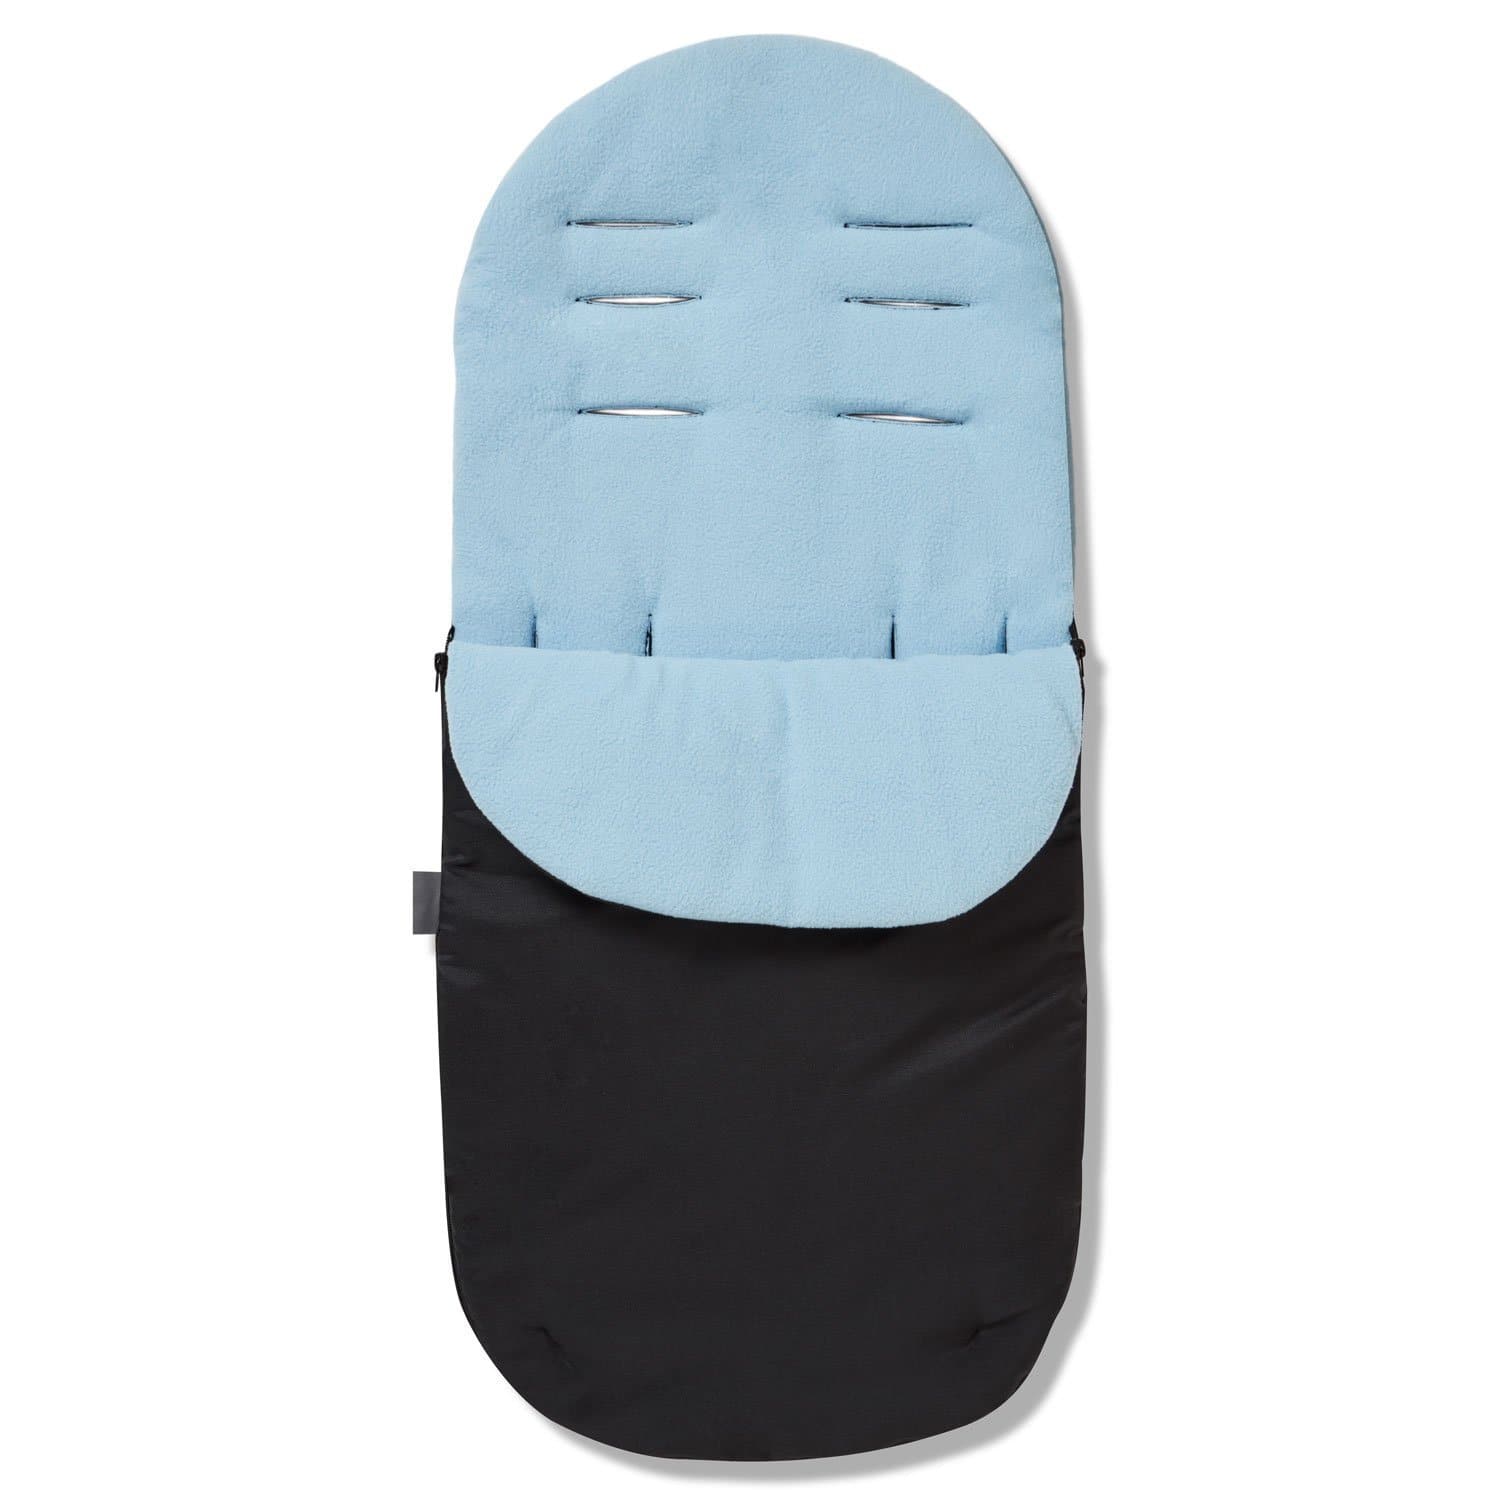 Footmuff / Cosy Toes Compatible with Recaro - Light Blue / Fits All Models | For Your Little One